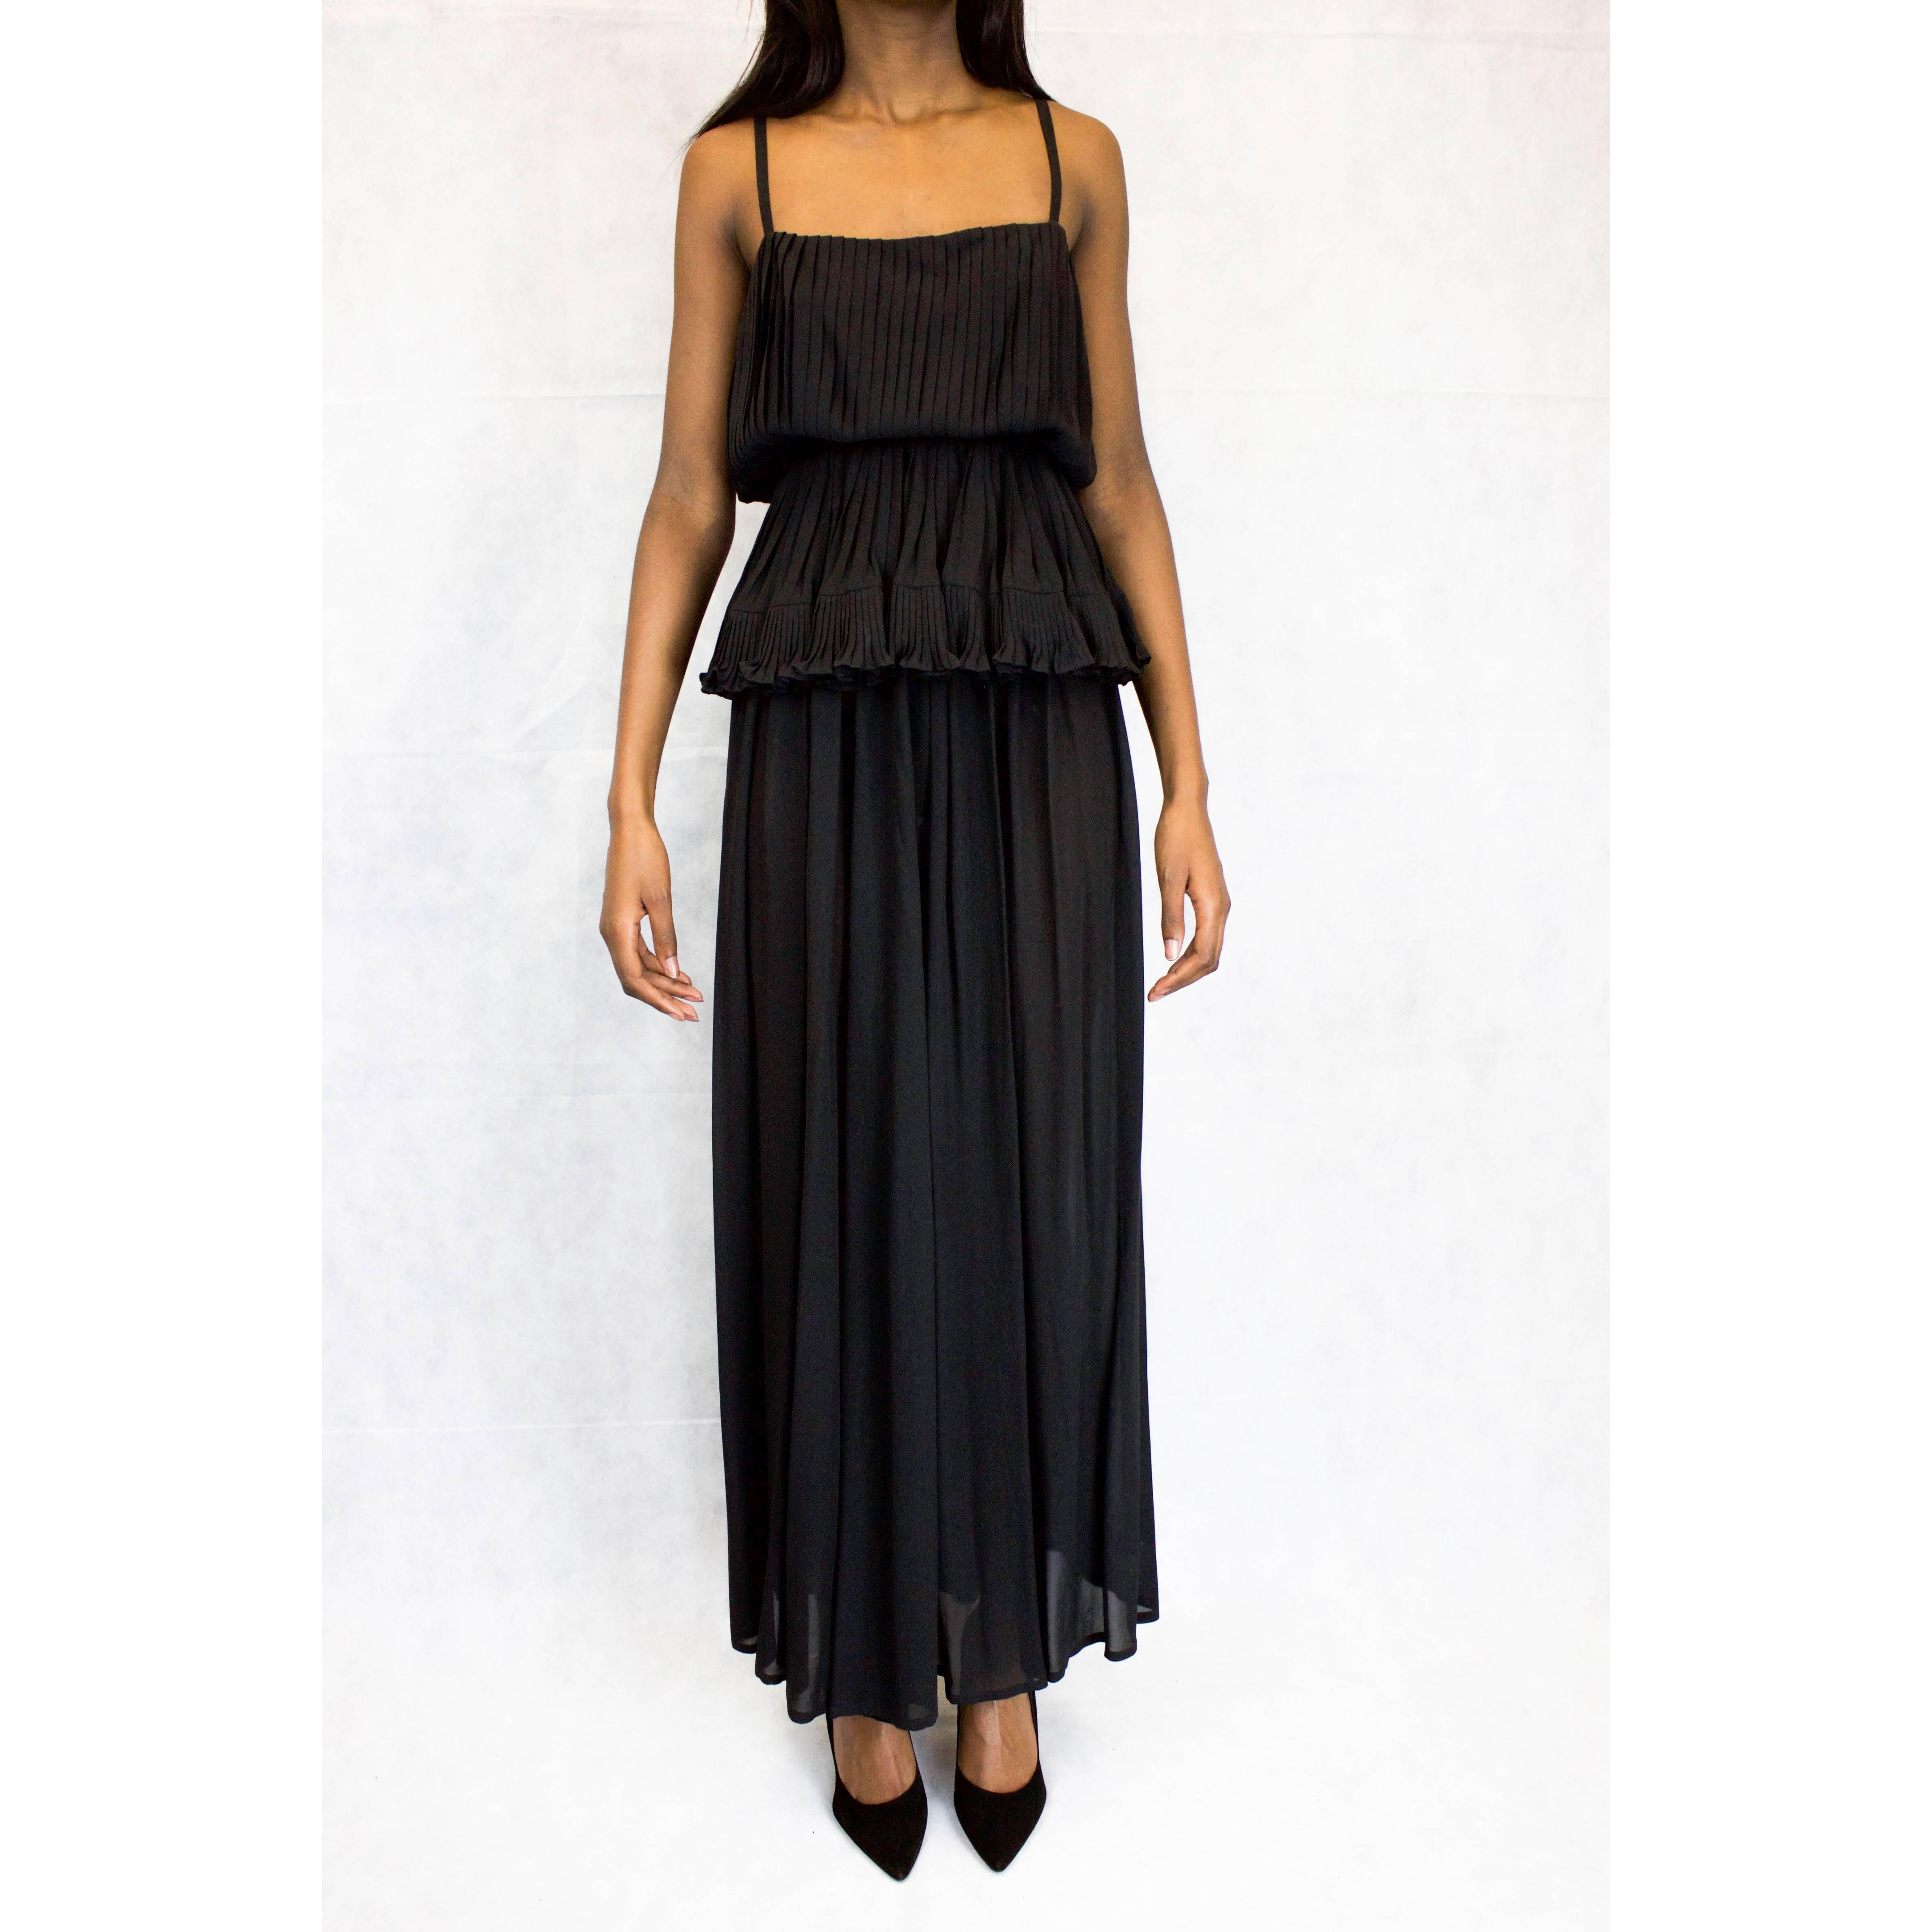 This beautiful 1930s style Schiaparelli ensemble is constructed from black silk chiffon. The top has a ballerina neckline and spaghetti straps and is encased in and framed by small hand pleats that cinch in then flare out at the waist. The full